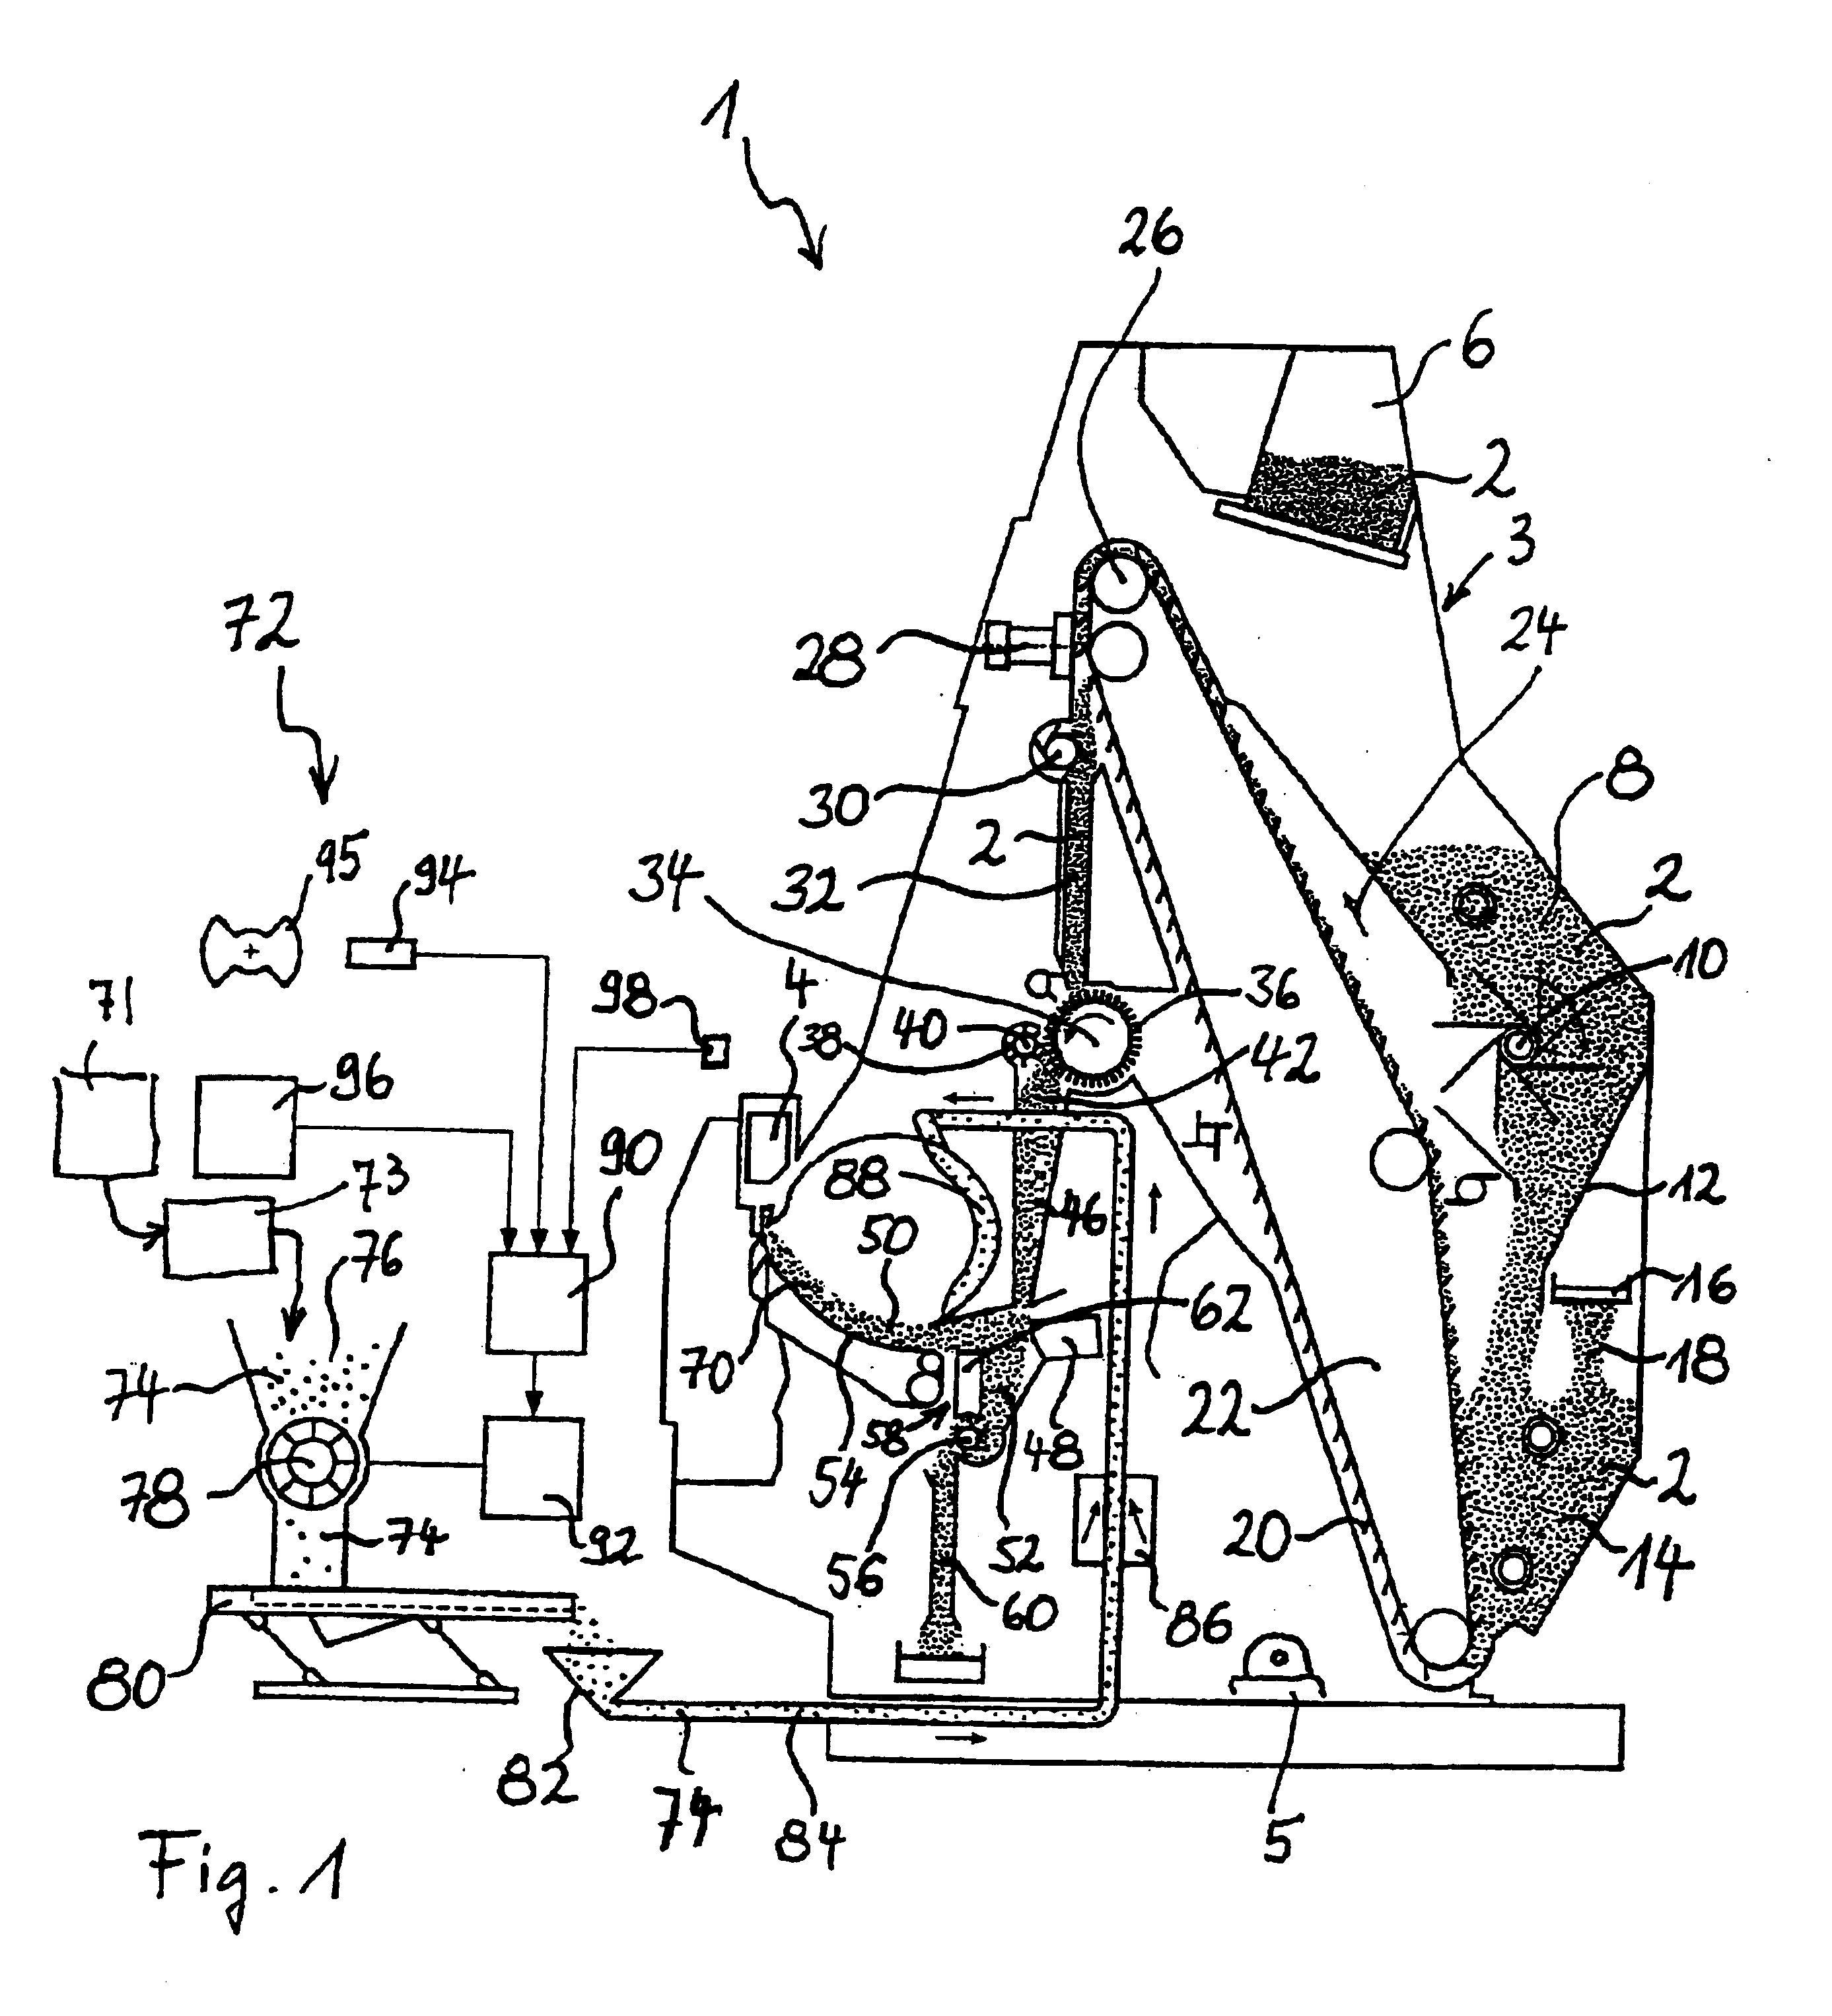 Method of and apparatus for recovering and recycling tobacco dust